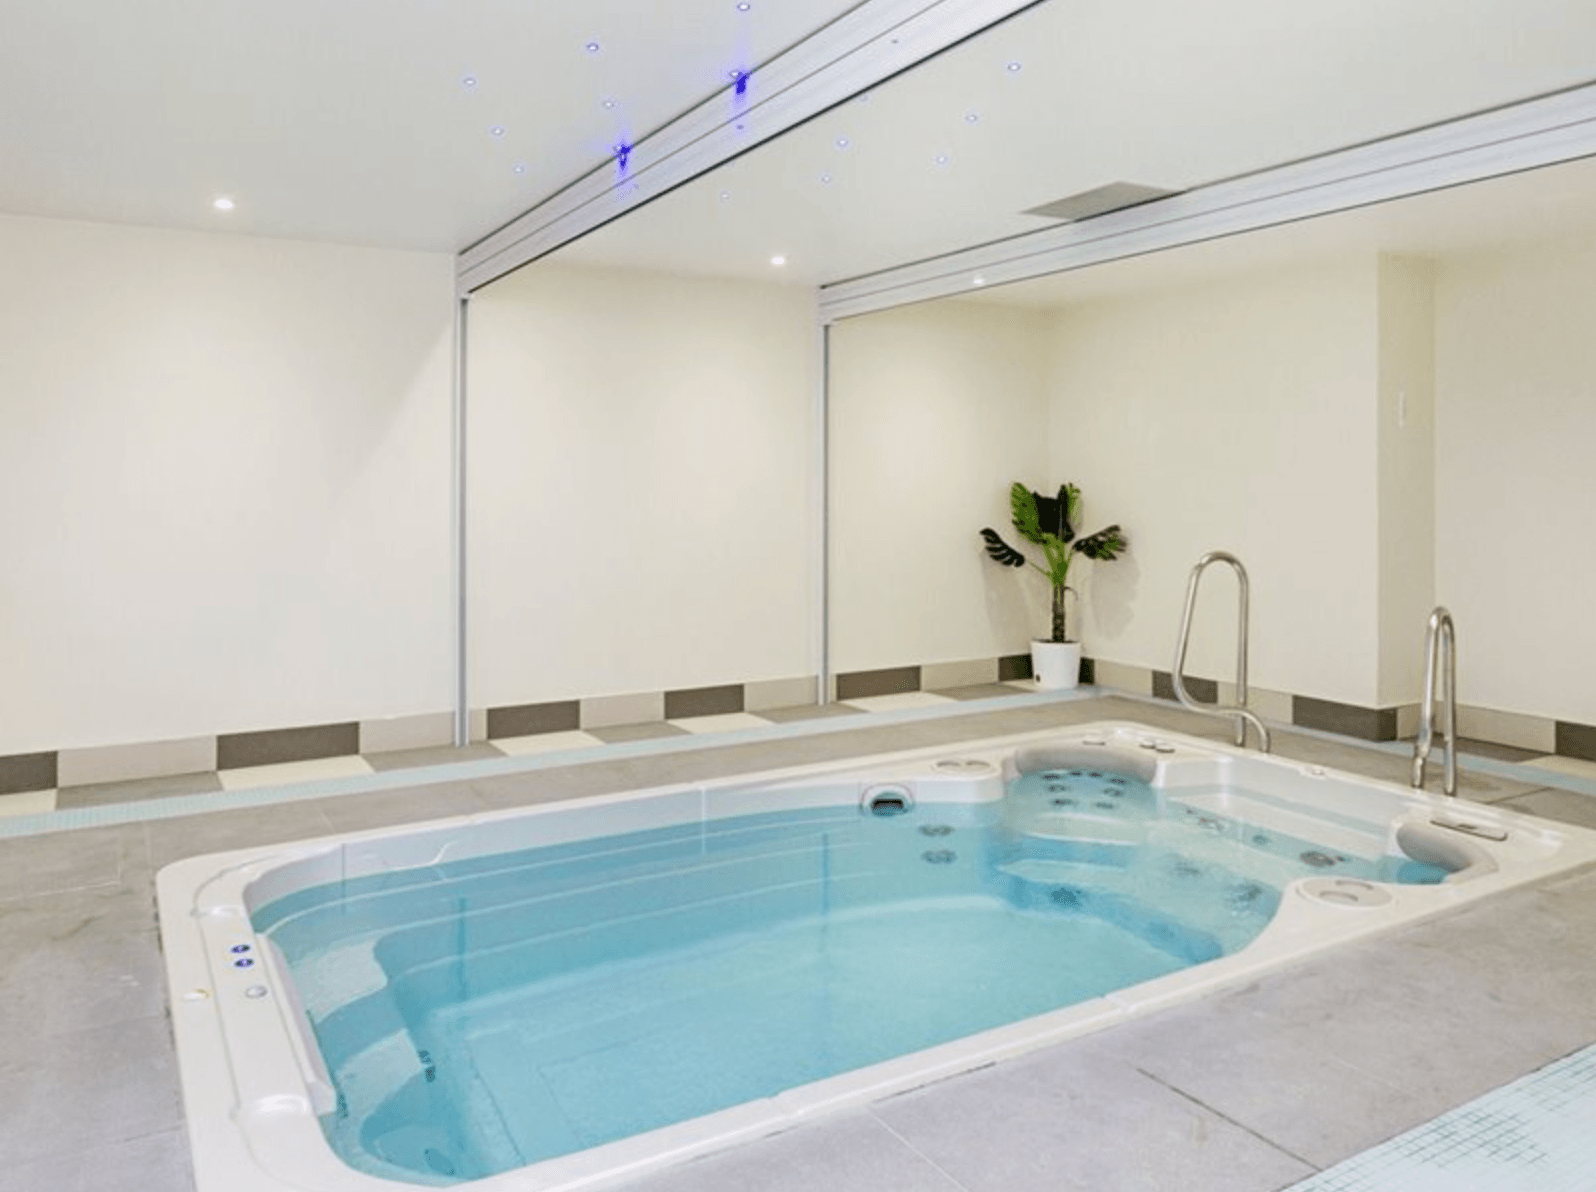 Hydrotherapy pool of Bagshot Park Rehabilitation in Bagshot, Surrey